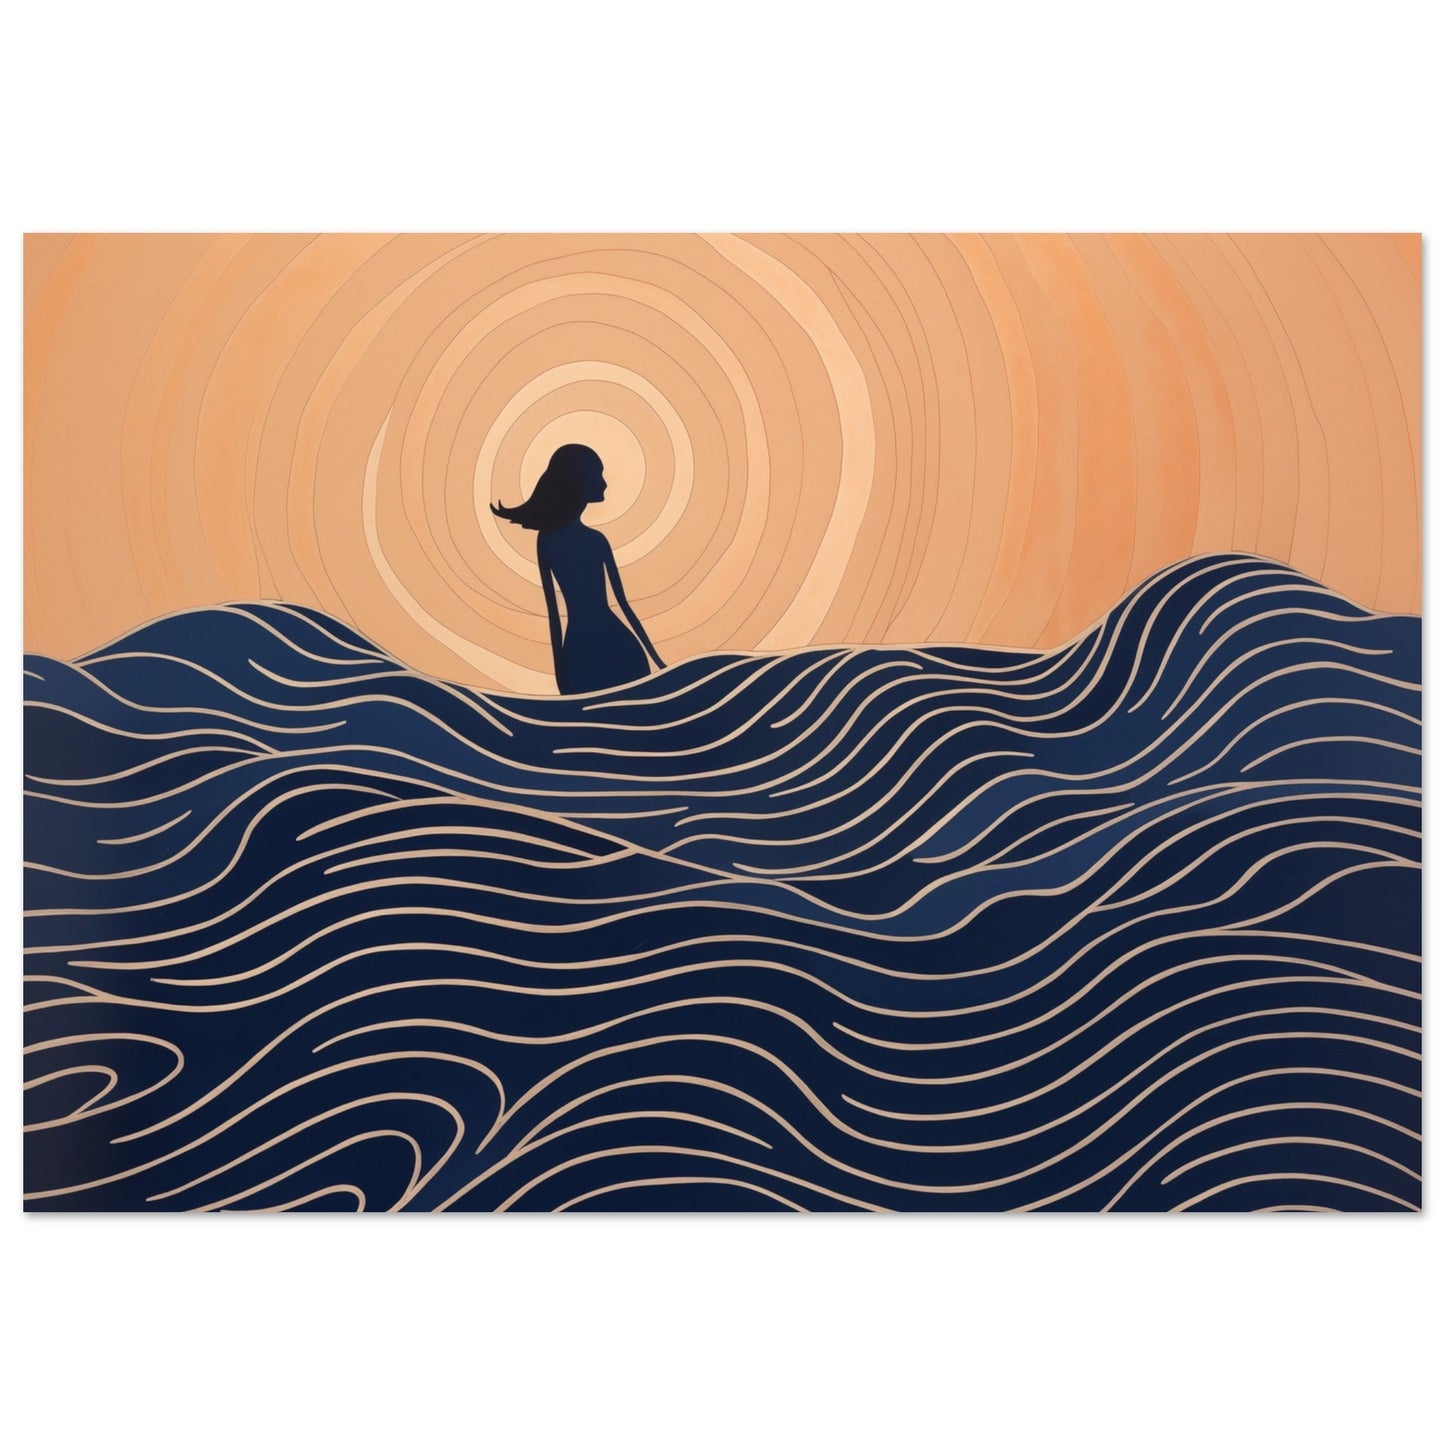 A stunning colored wall art featuring Serenity Amidst the Swell, a silhouette of a woman in the ocean, with breathtaking waves in the background.